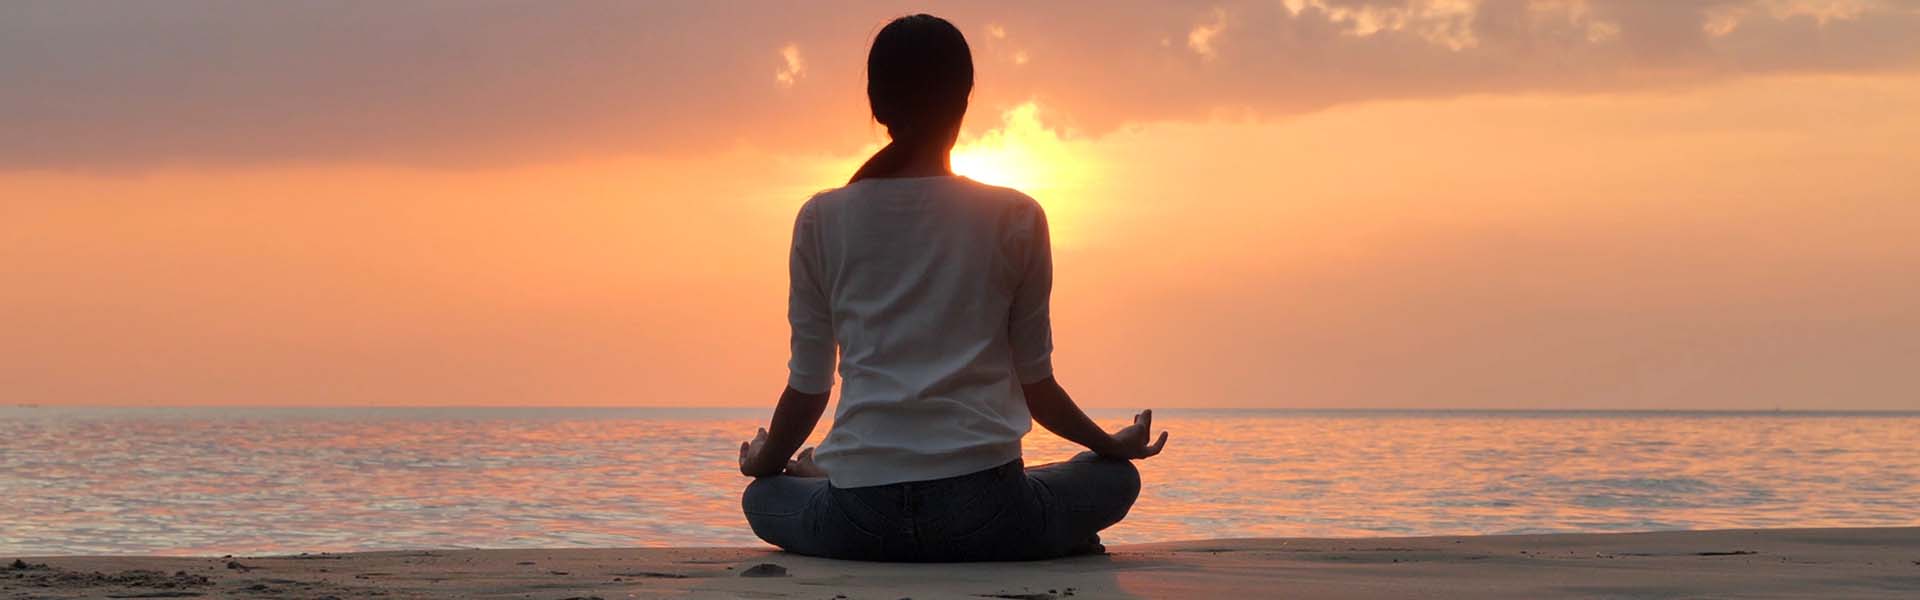 Person sitting in a yoga pose looking at a sunrise over the ocean.